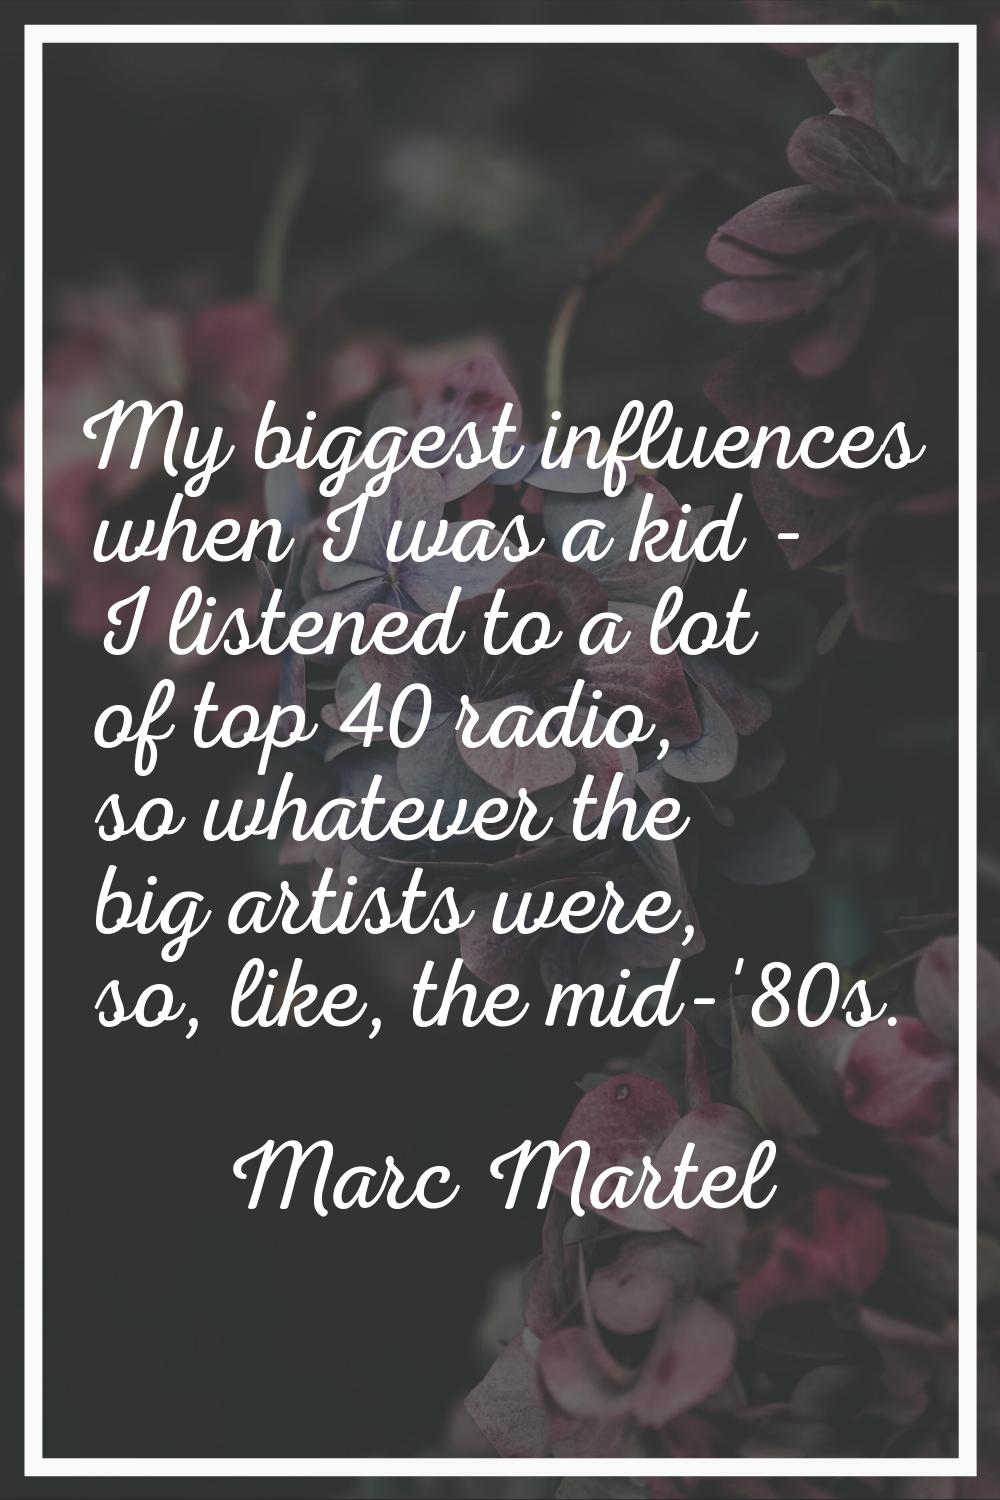 My biggest influences when I was a kid - I listened to a lot of top 40 radio, so whatever the big a